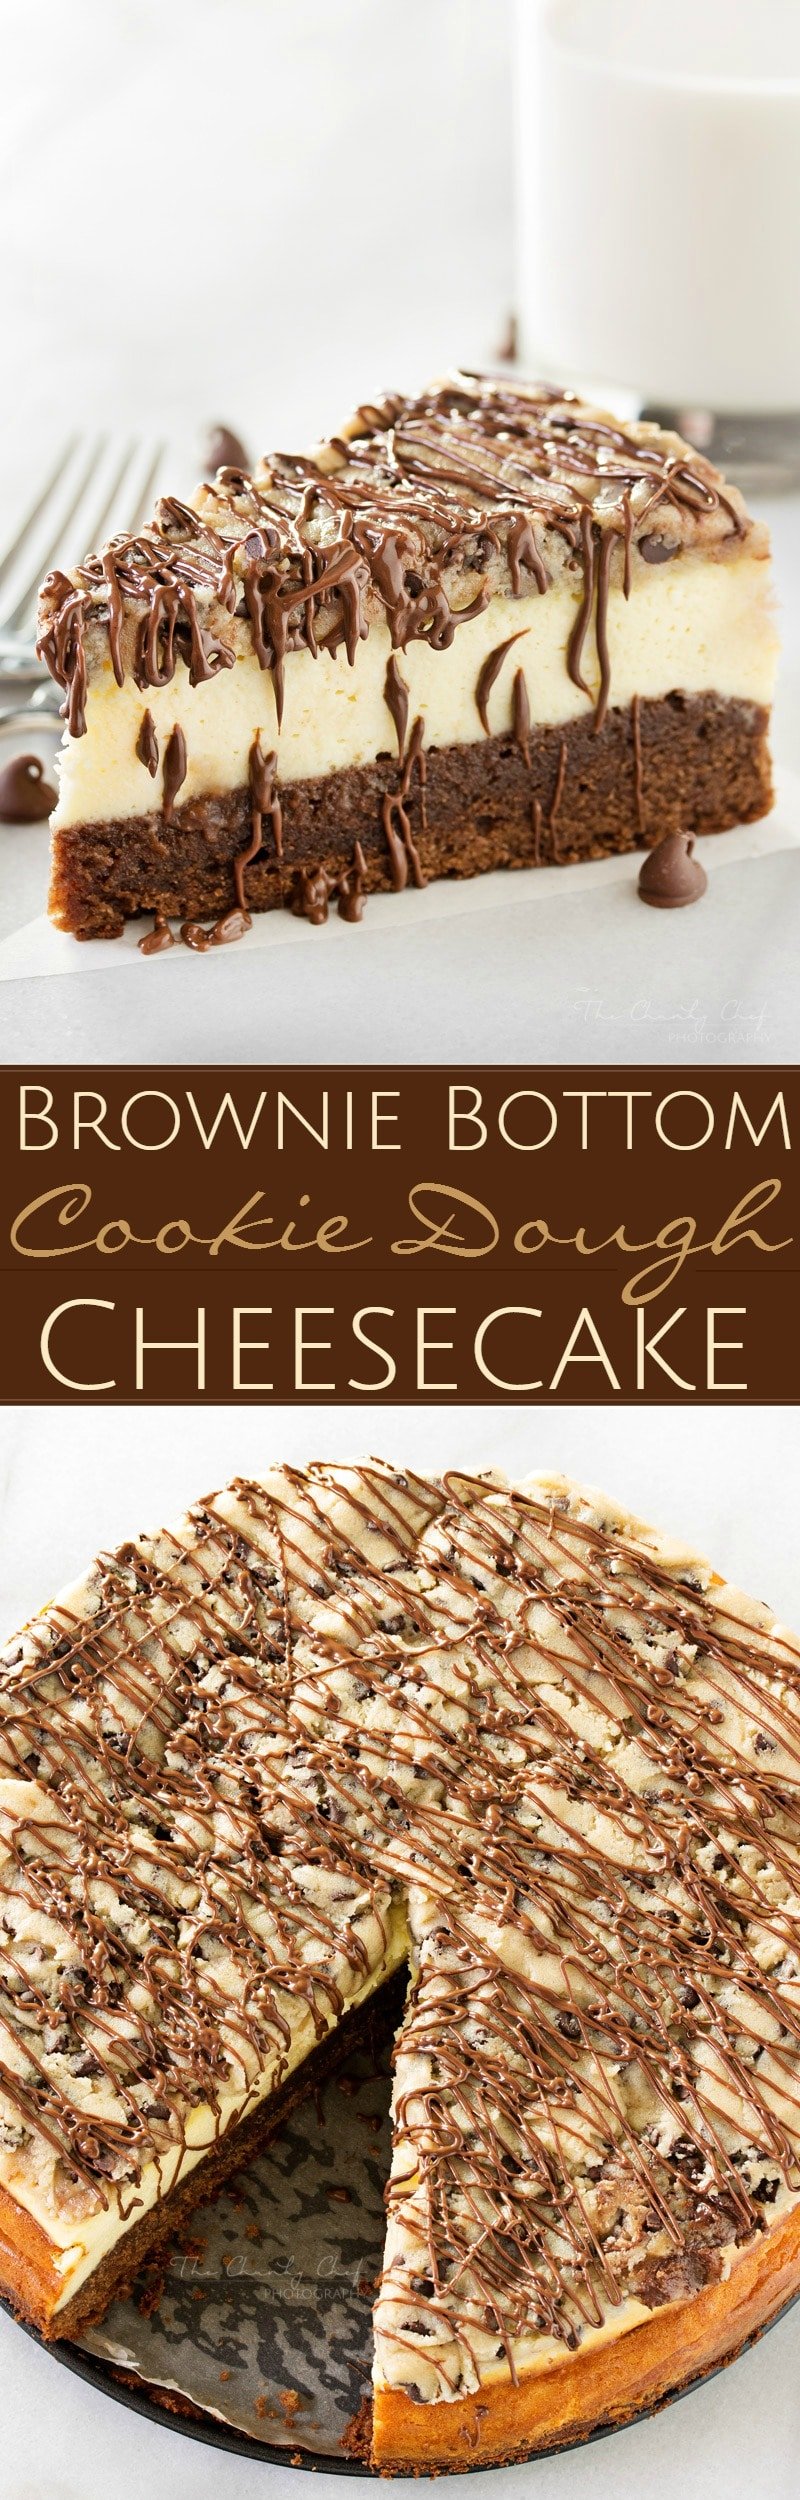 Brownie-Bottom-Cookie-Dough-Cheesecake | This impressive, yet super easy, brownie bottom cookie dough cheesecake looks as fancy as any dessert you've had from a restaurant! The ULTIMATE cheesecake for the ULTIMATE dessert lover! | http://thechunkychef.com